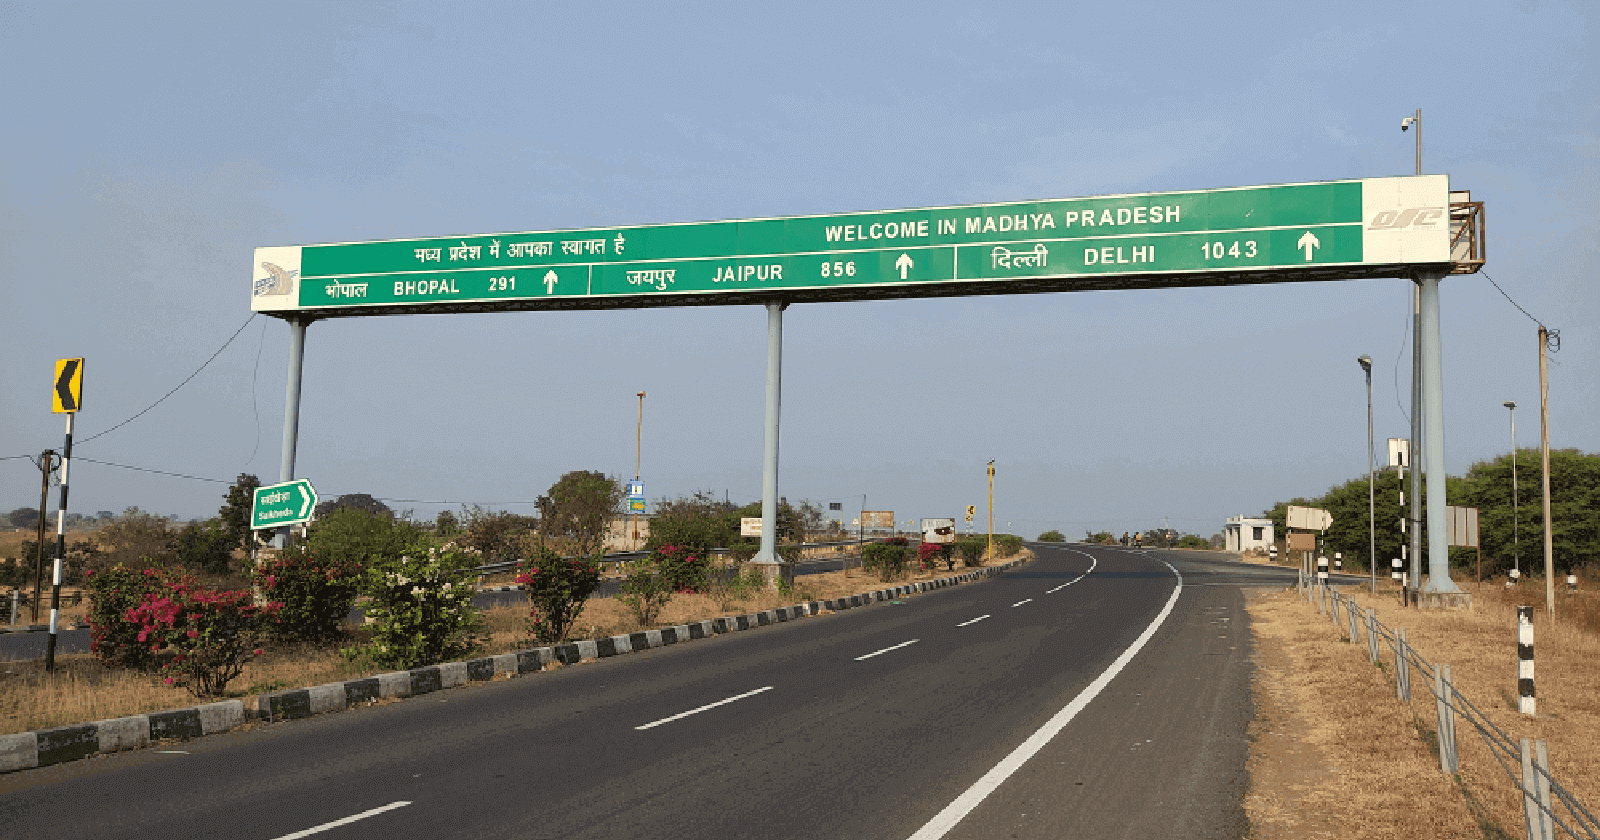 Madhya Pradesh Road Tax: Calculation, Rates & Online Payment